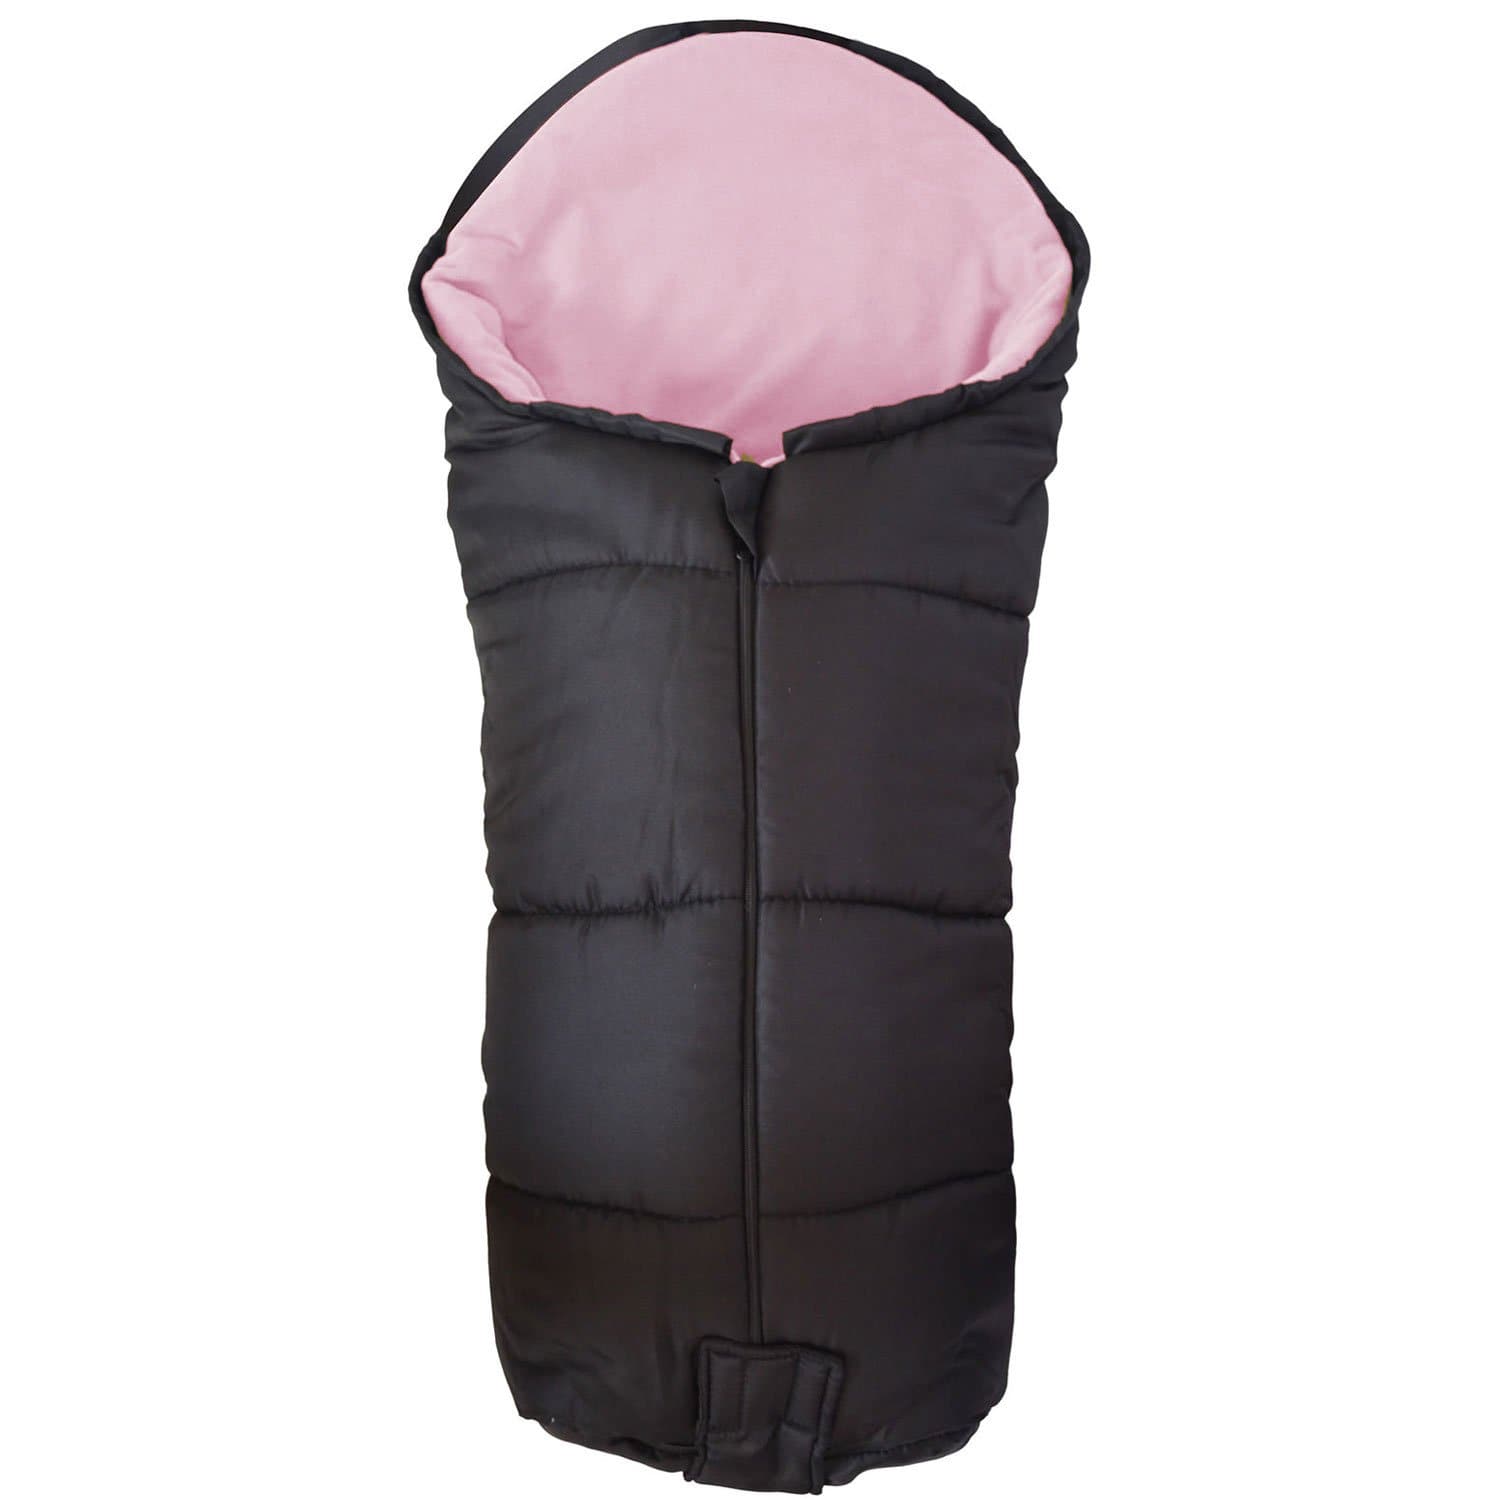 Deluxe Footmuff / Cosy Toes Compatible with Kiddicare - For Your Little One